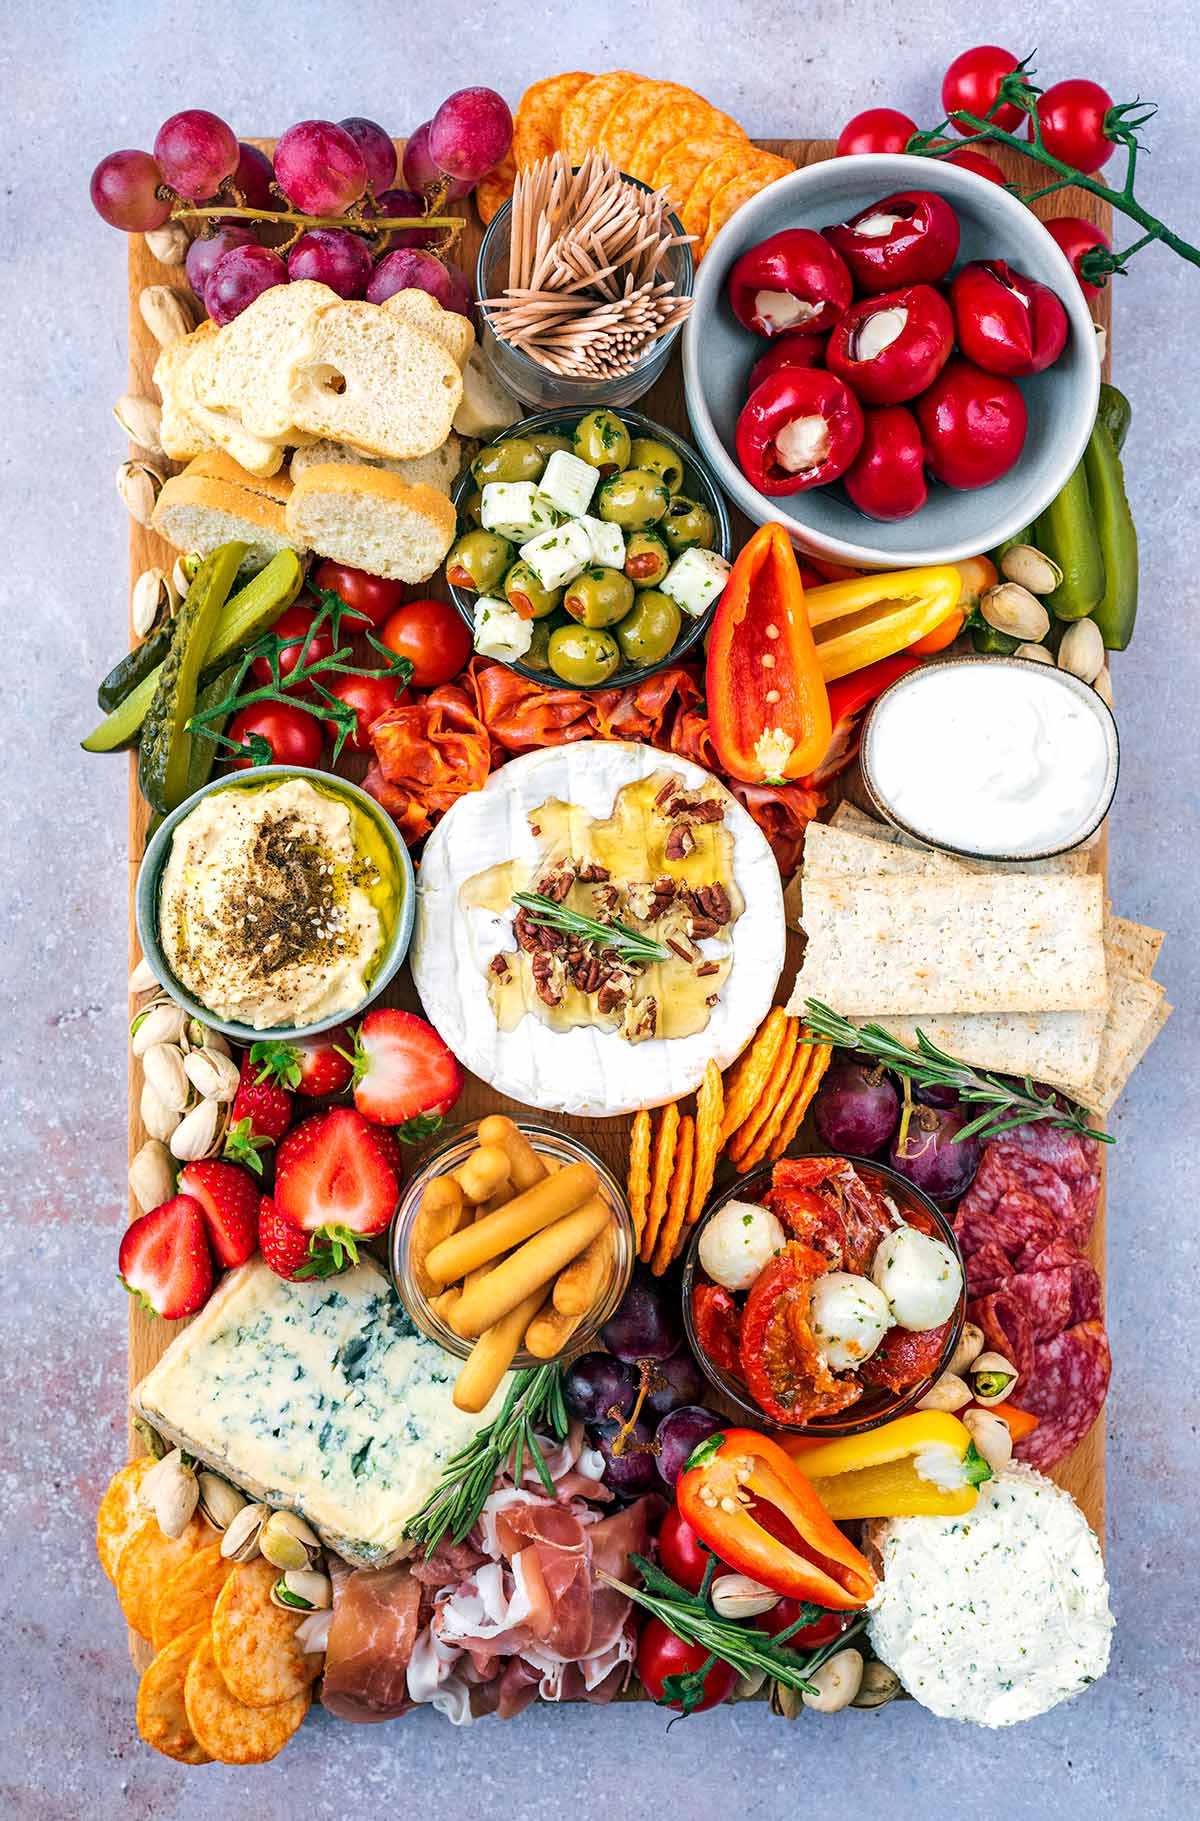 A sharing platter of meats, cheeses, breads and vegetables.